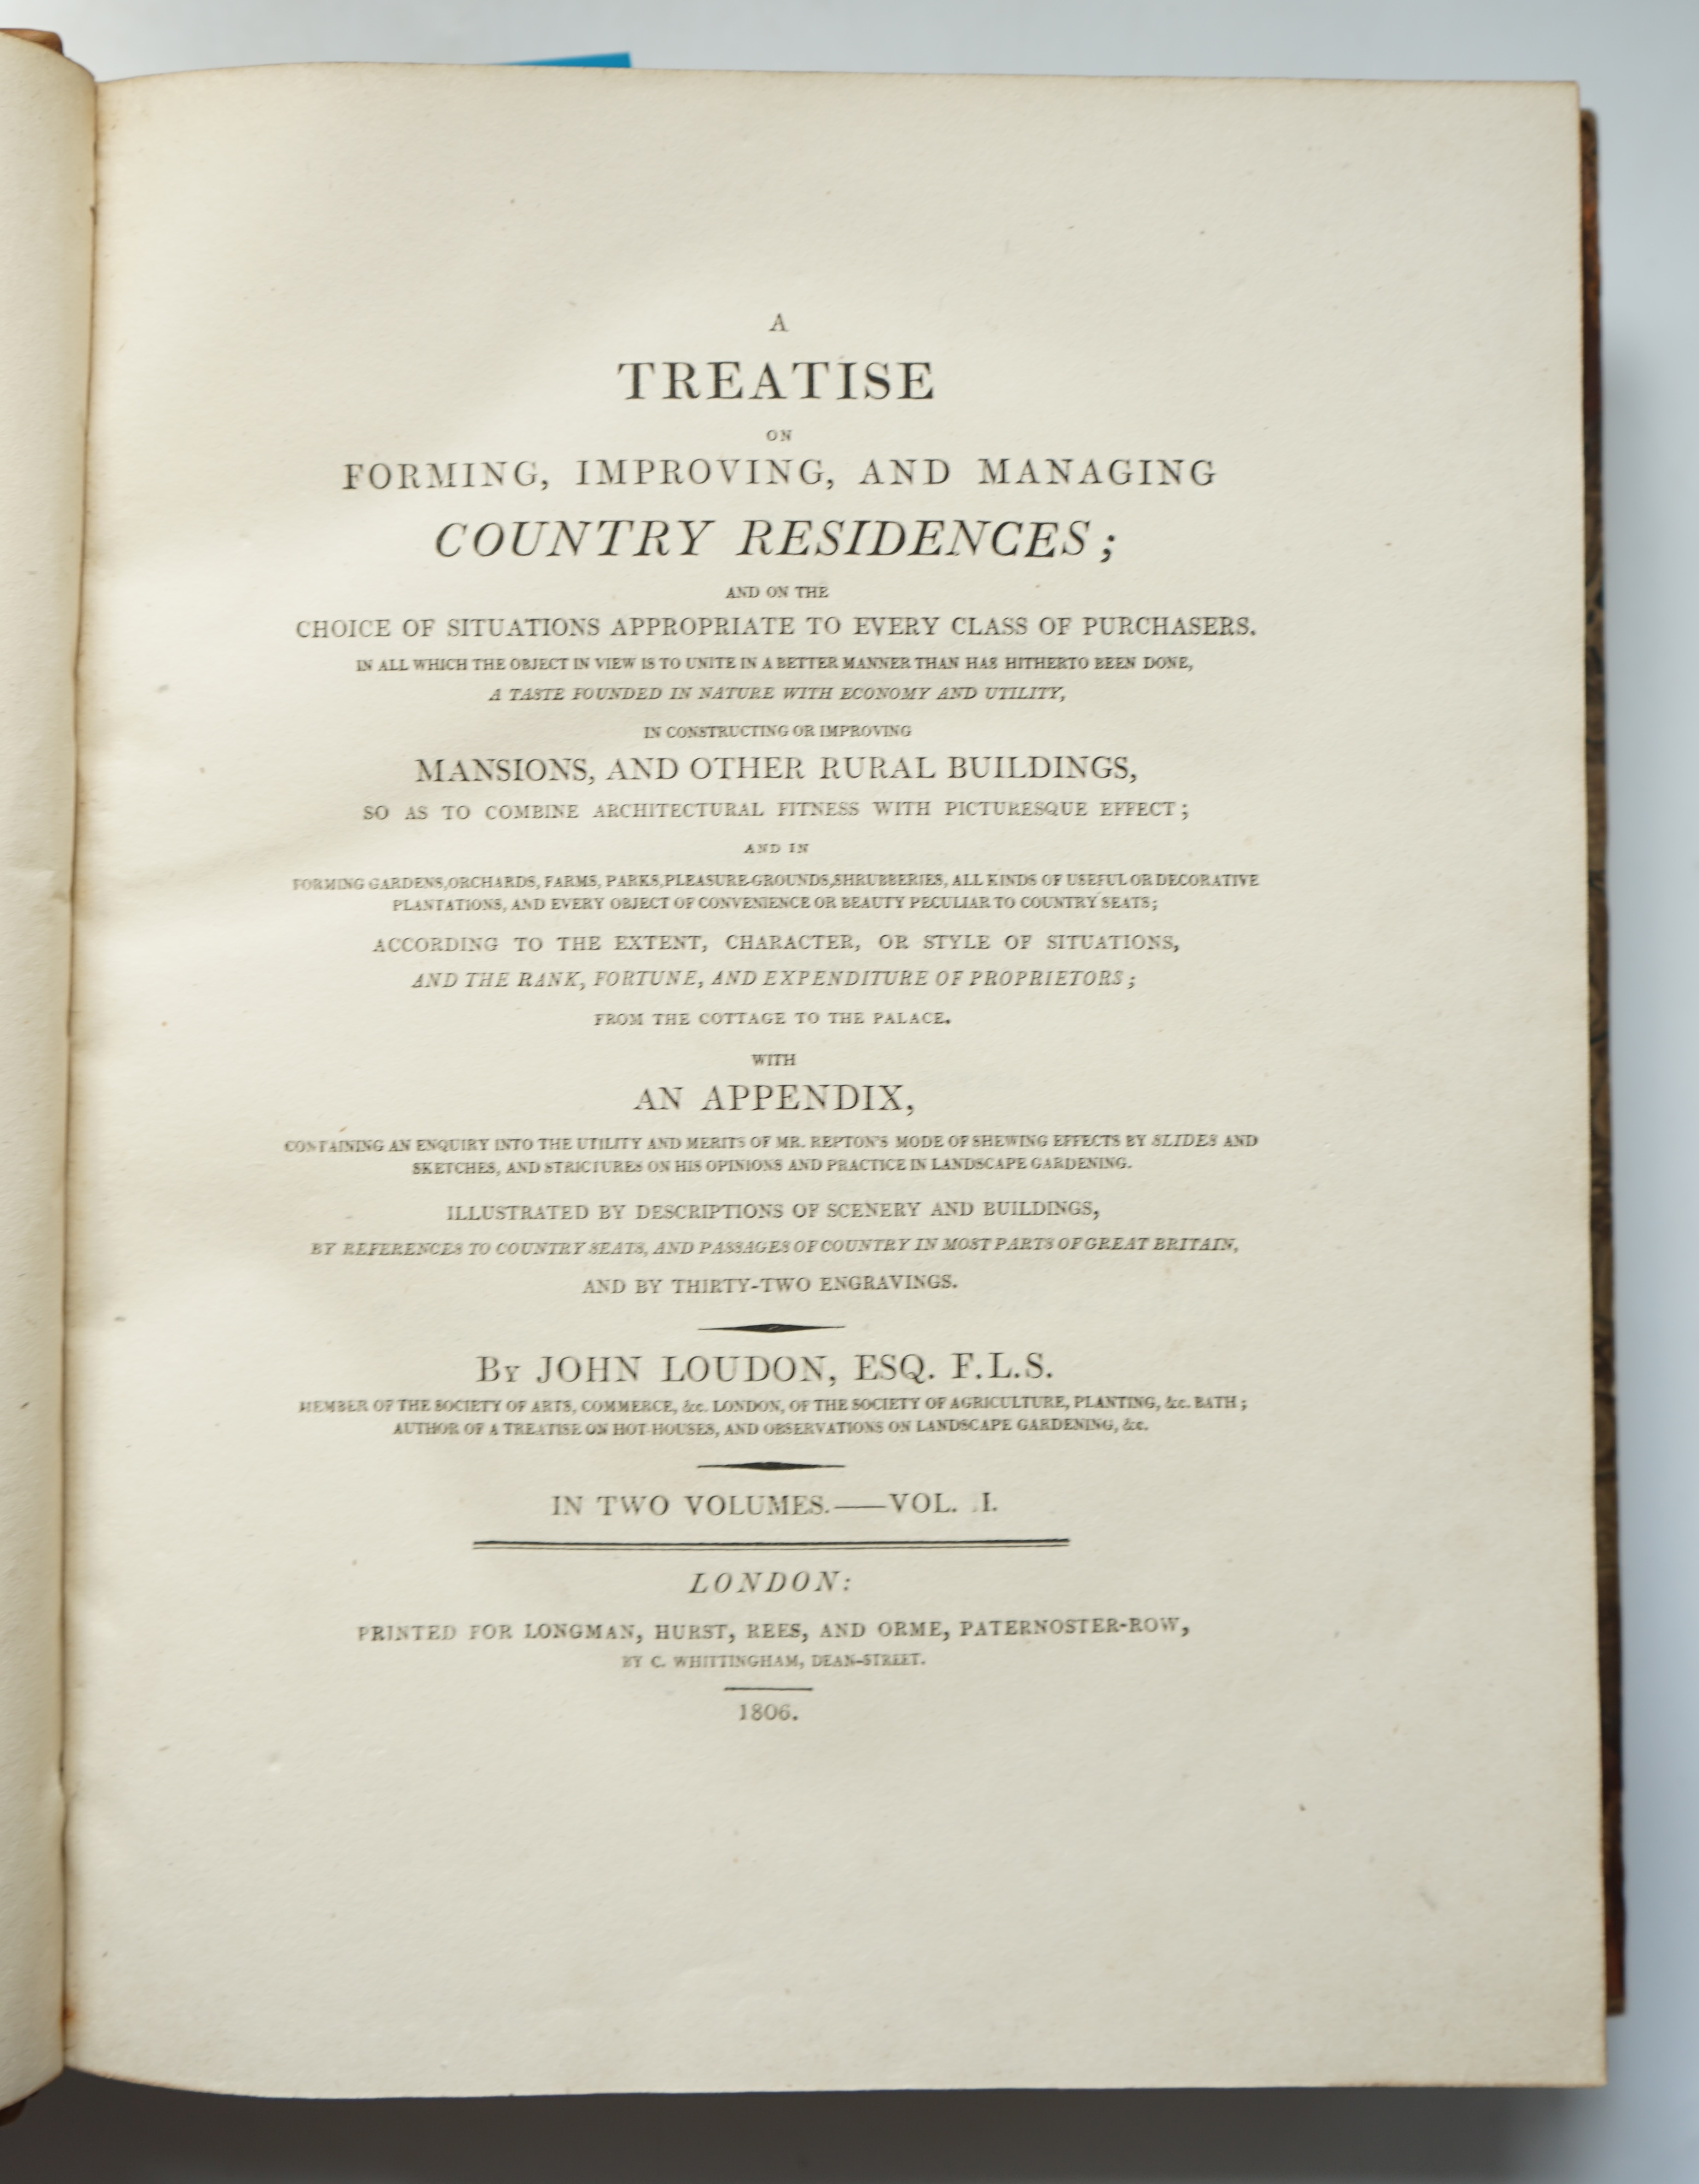 Loudon, John - A Treatise on Forming, Improving, and Managing Country Residences; Choice of Situations Appropriate to Every Class of Purchasers, 2 vols, 4to, rebound half calf, half titles, 32 engraved plates, The Societ